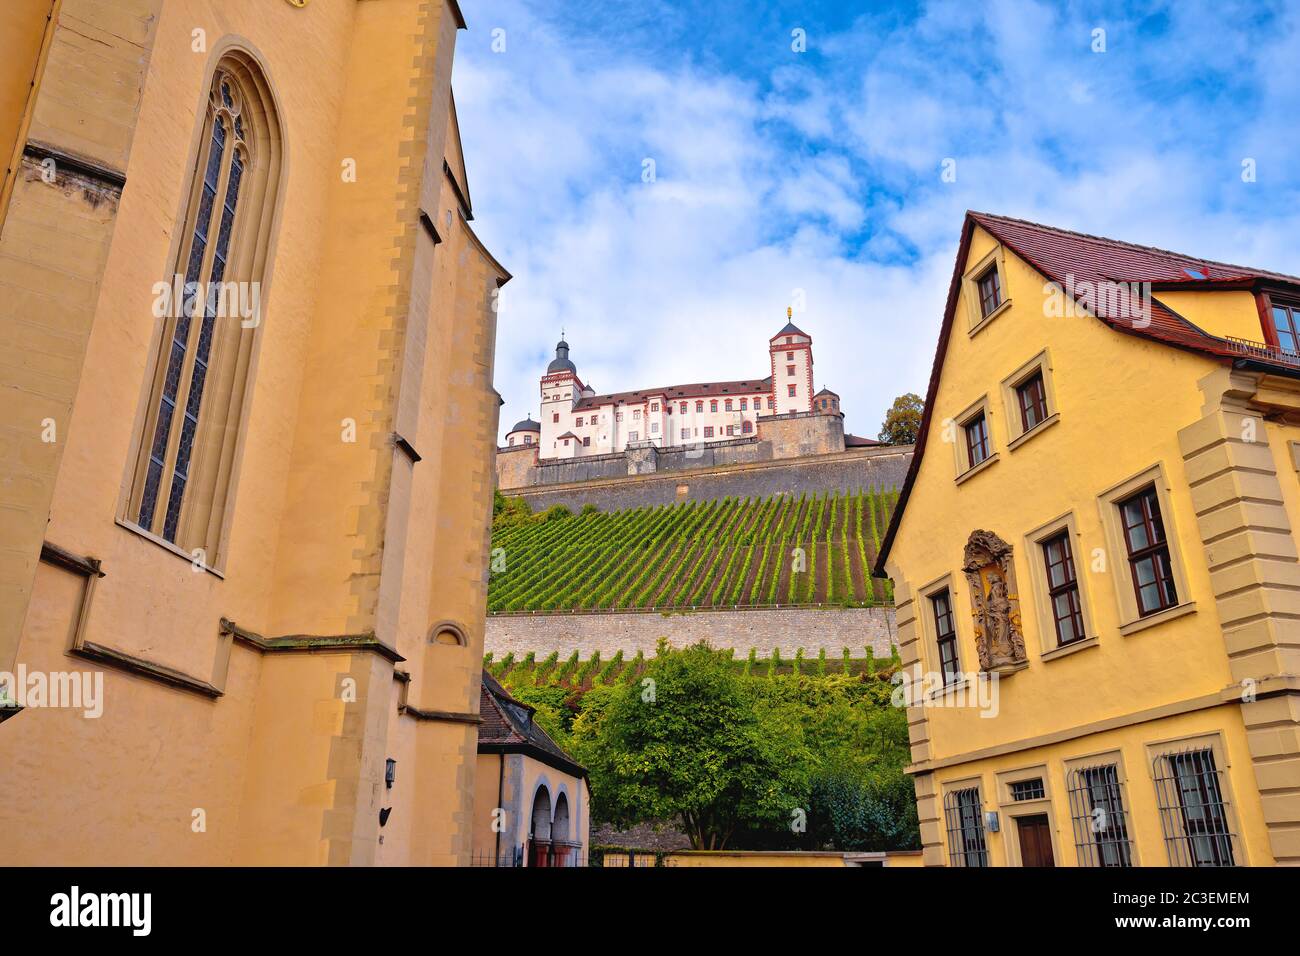 Wurzburg. Architecture and and scenic Wurzburg castle and vineyards in Wurzburg view Stock Photo